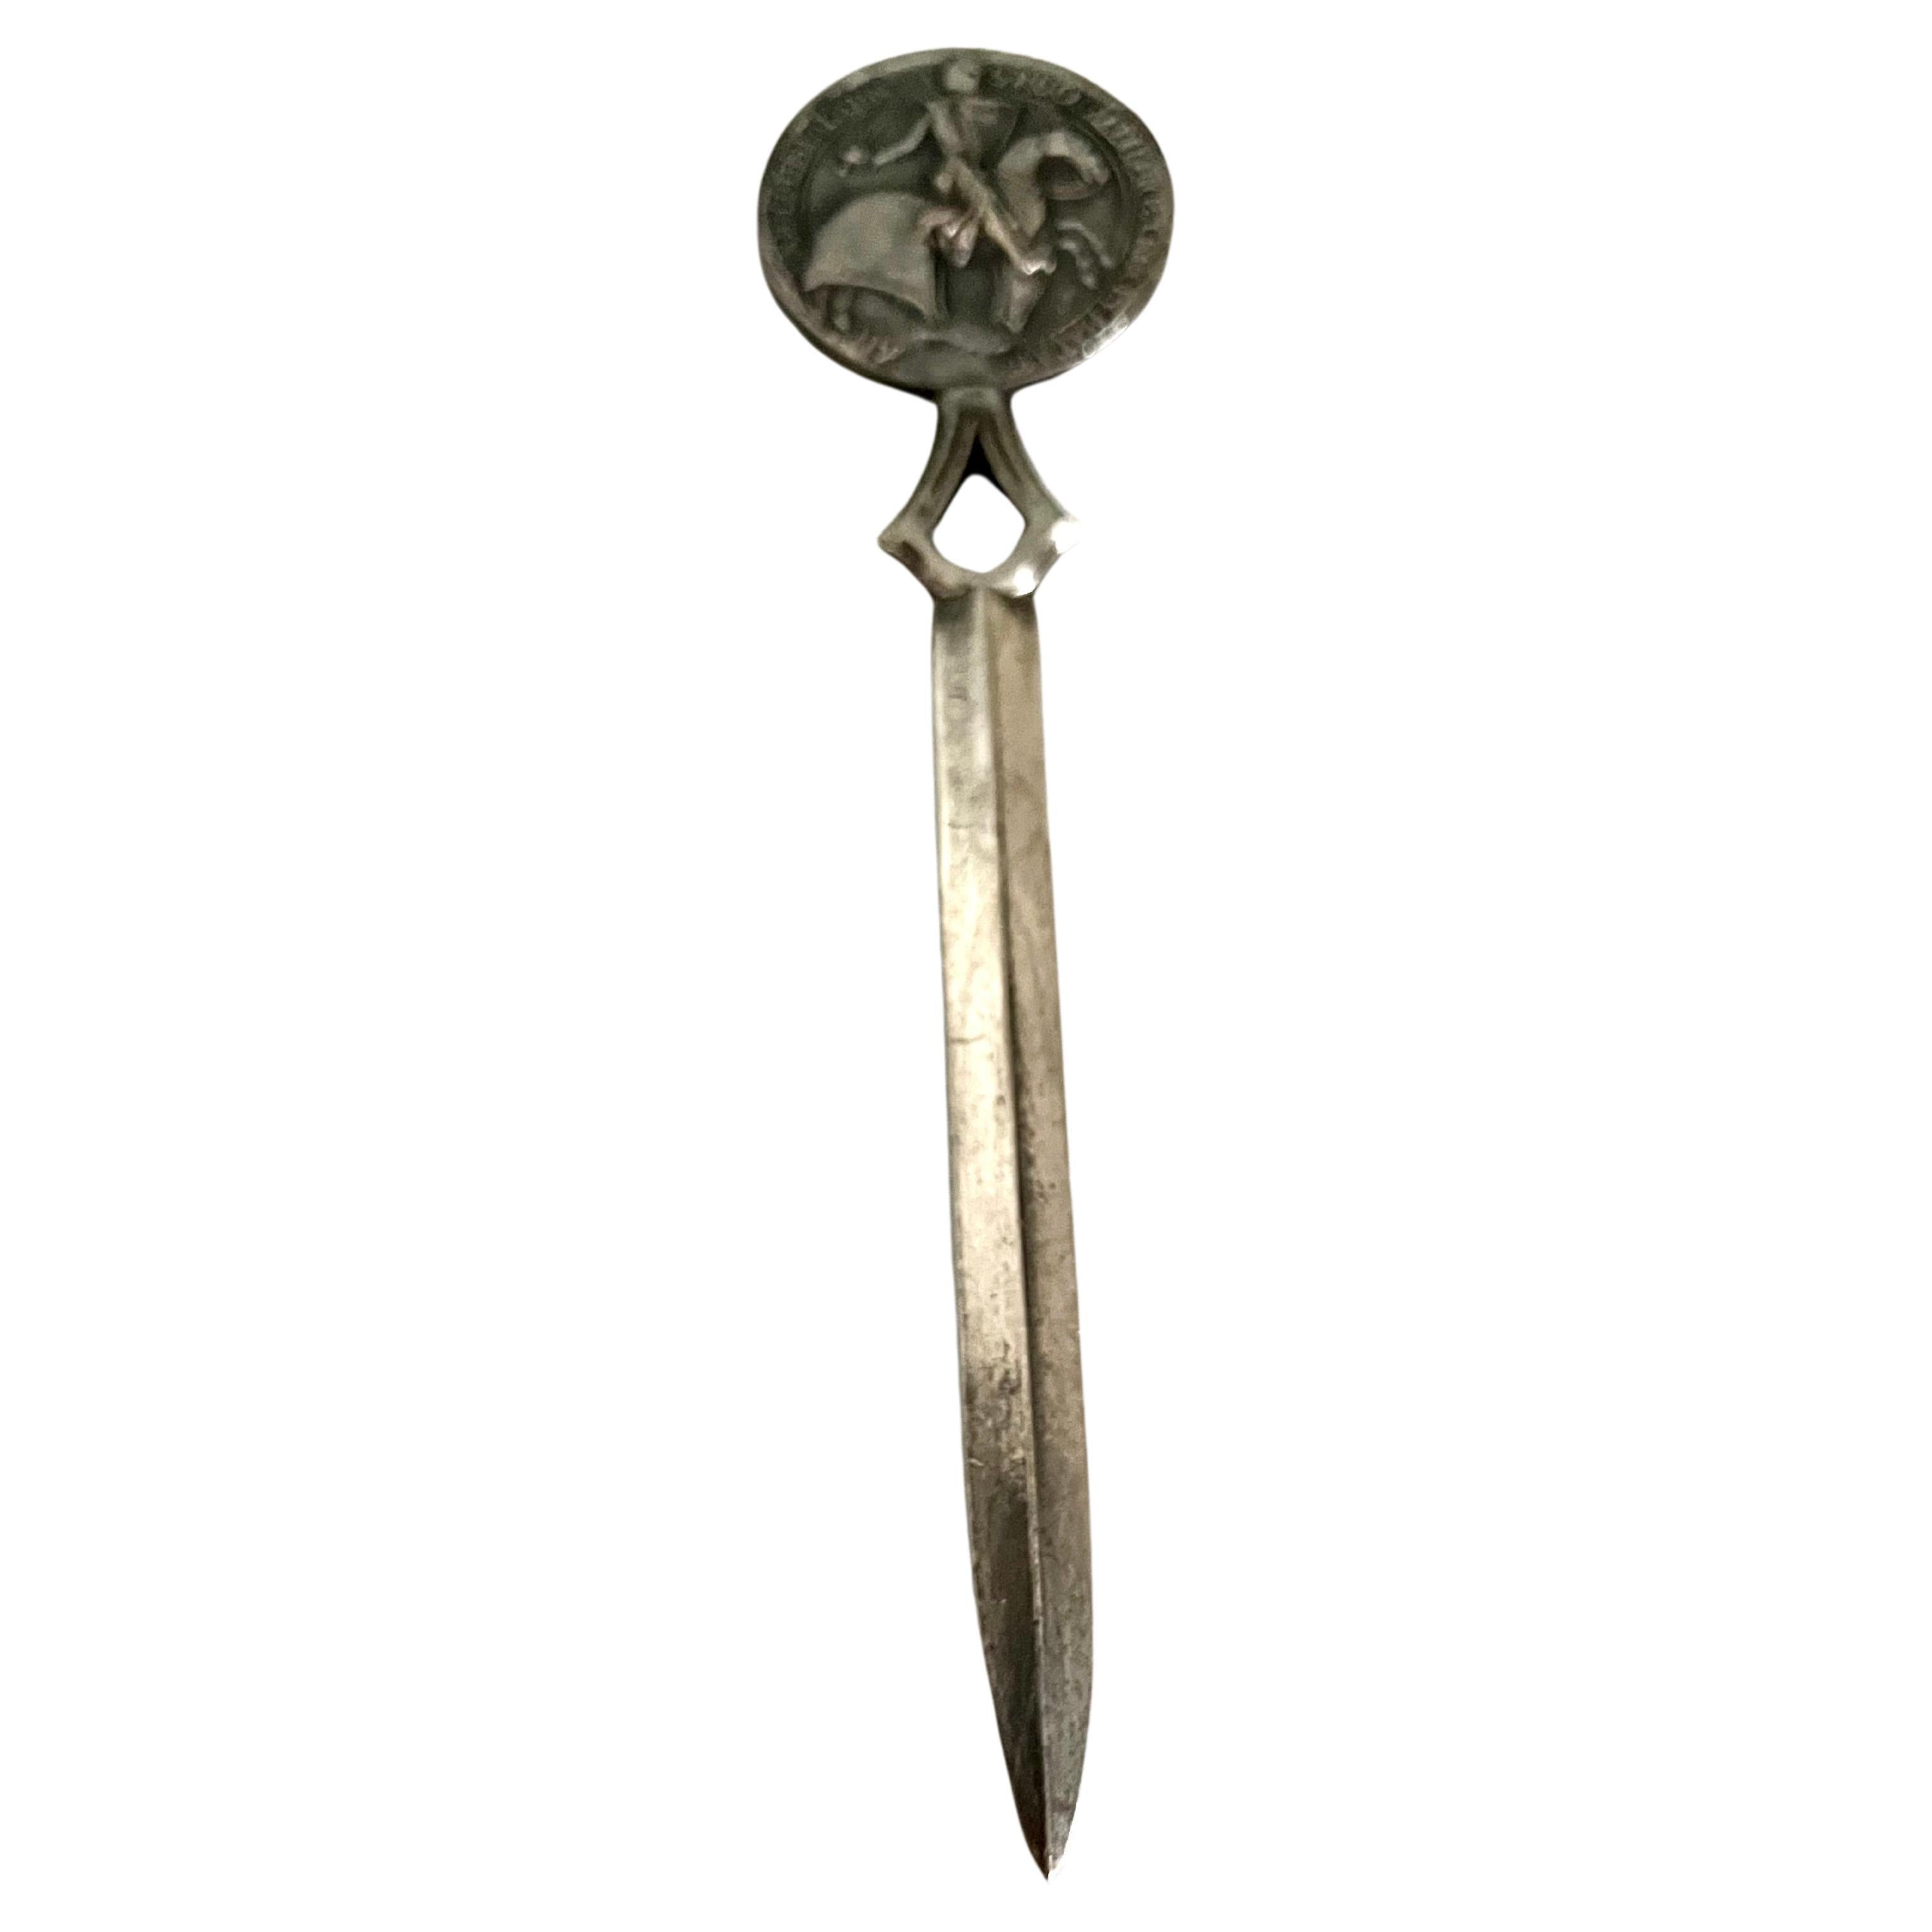 Acquired in France, a letter opener with the image of a man on a horse. a nice addition to your desk or work station.